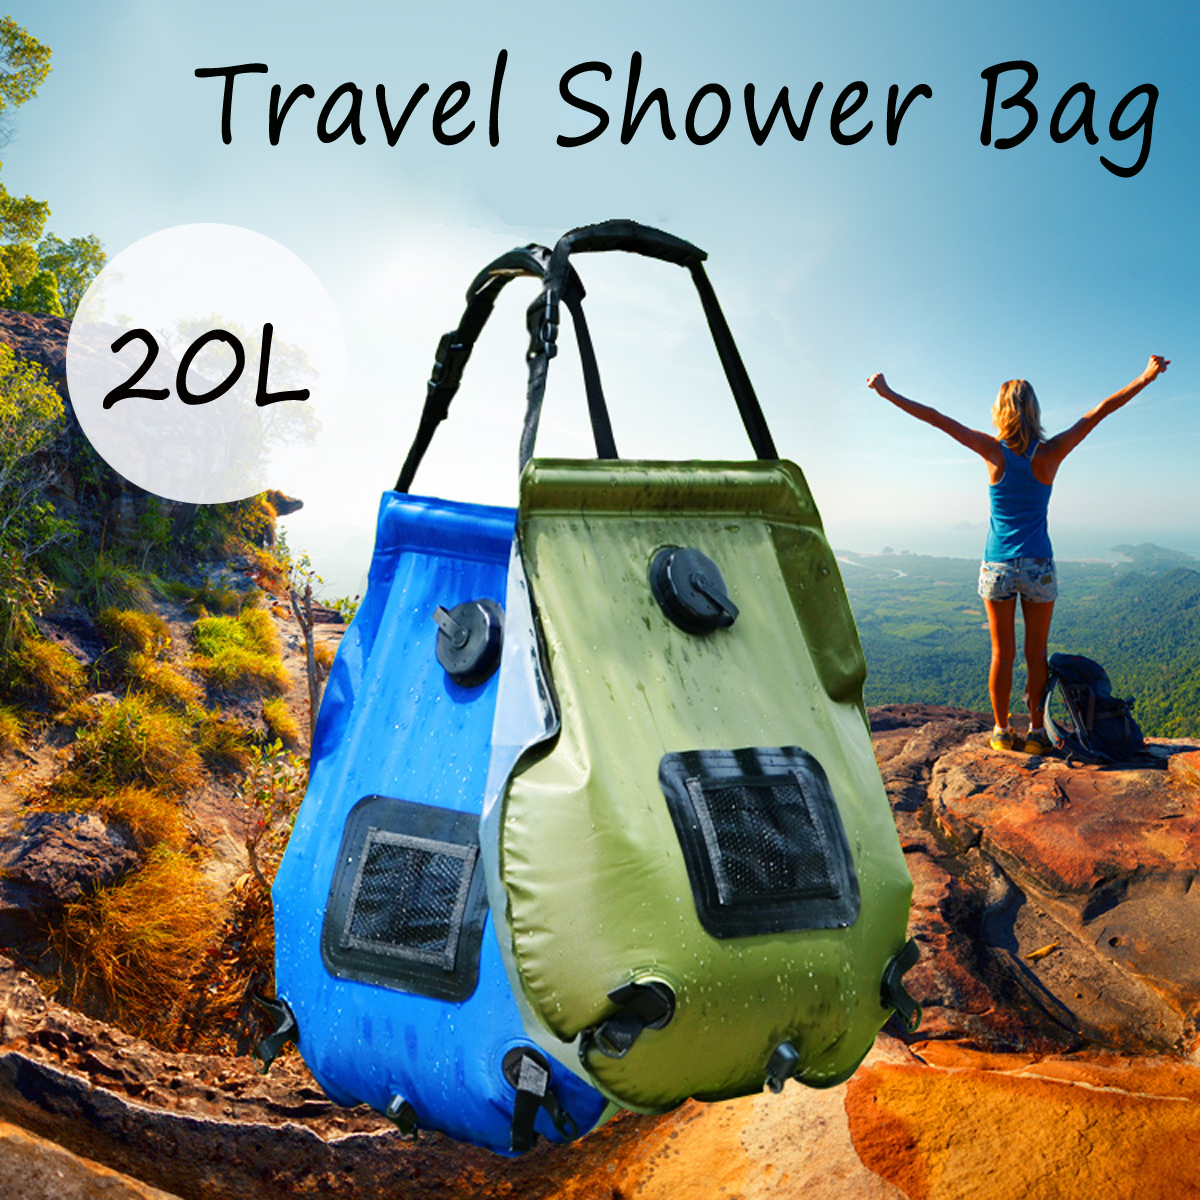 20L-Foldable-Portable-Water-Shower-Bathing-Bag-Solar-Energy-Heated-PVC-Outdoor-Travel-Camping-1724741-2